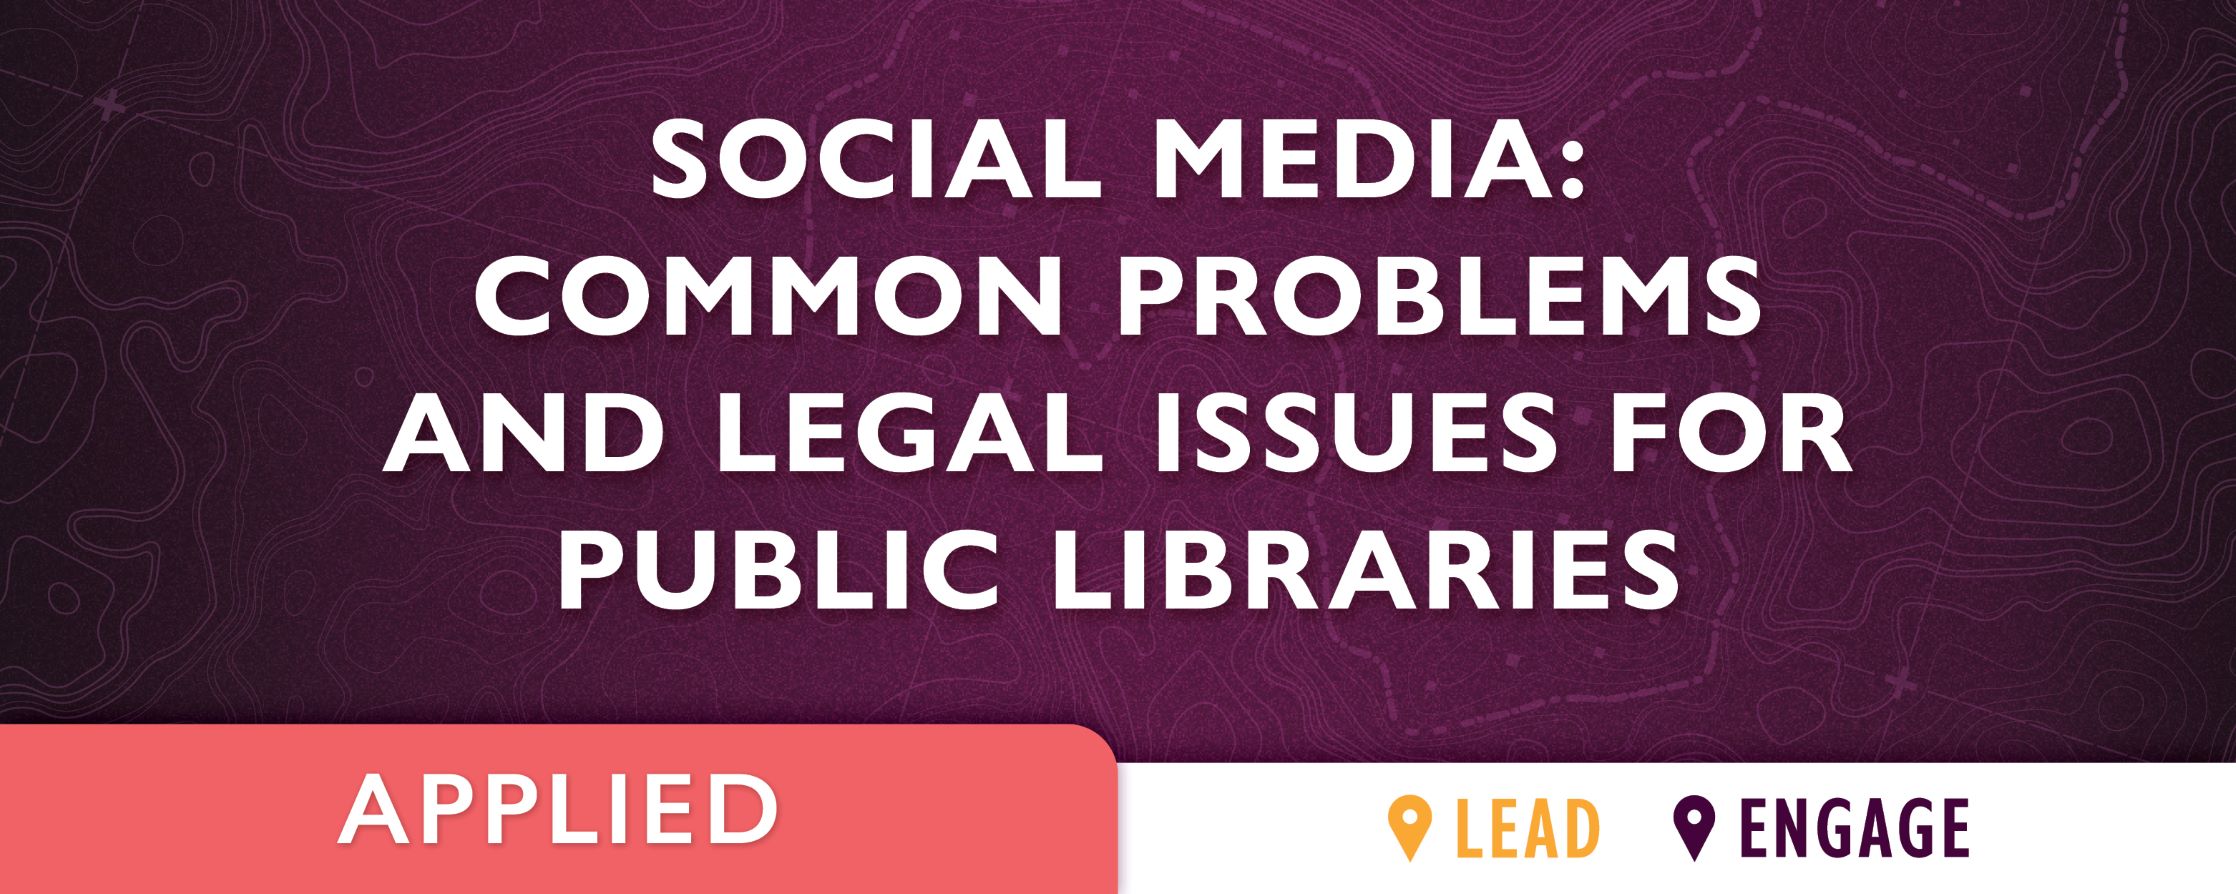 purple background with text: Social Media: Common Problems and Legal Issues for Public Libraries